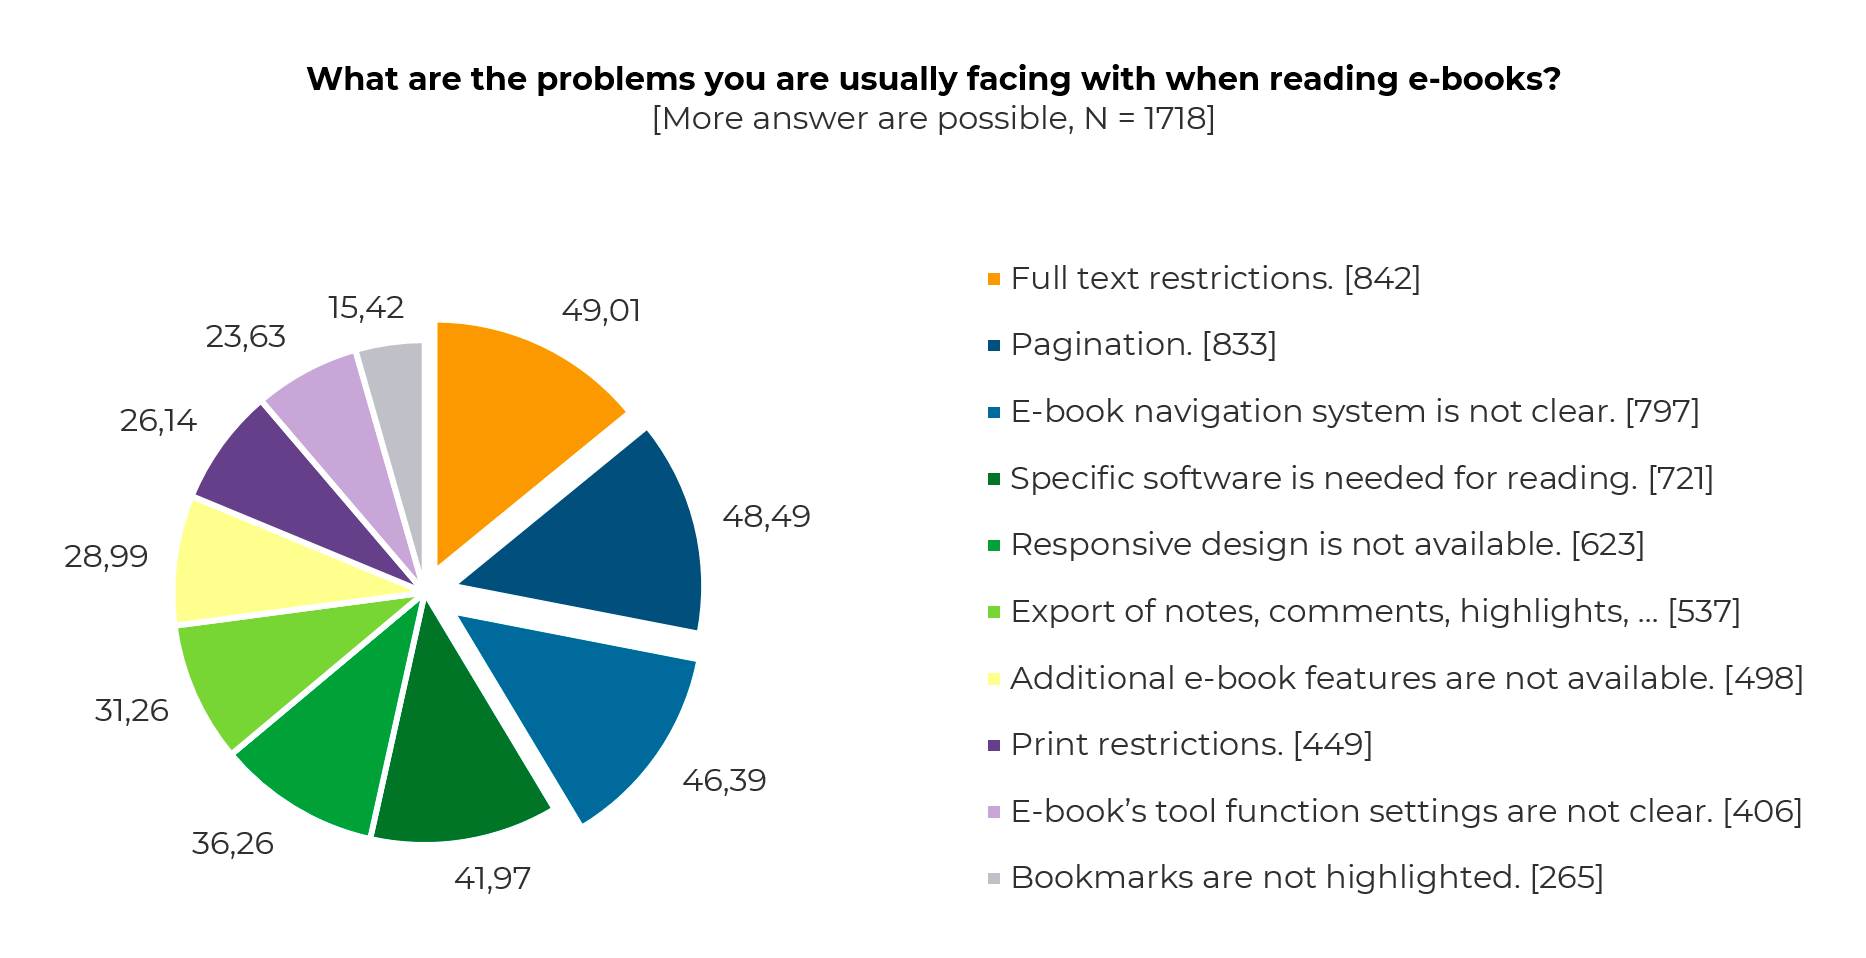 What are the problems you are usually facing with when reading e-books?